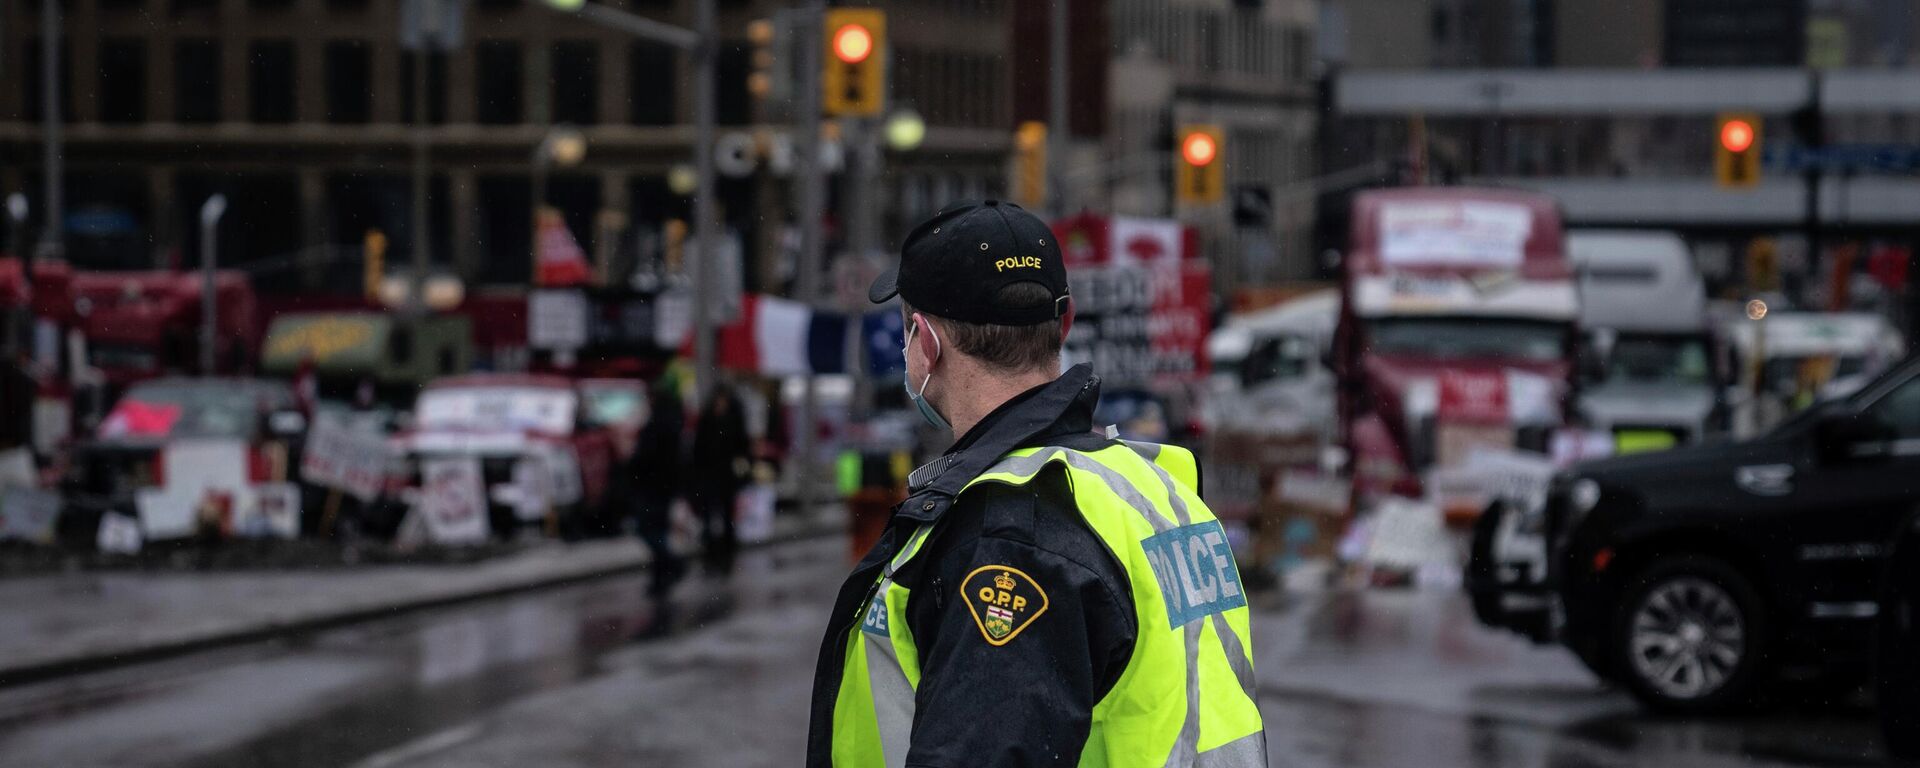 An Ontario Provincial Police officer walks in front of a row of trucks parked on the street near the Canadian parliament building in Ottawa on Thursday, Feb. 17, 2022. (AP Photo/Robert Bumsted) - Sputnik India, 1920, 19.06.2023